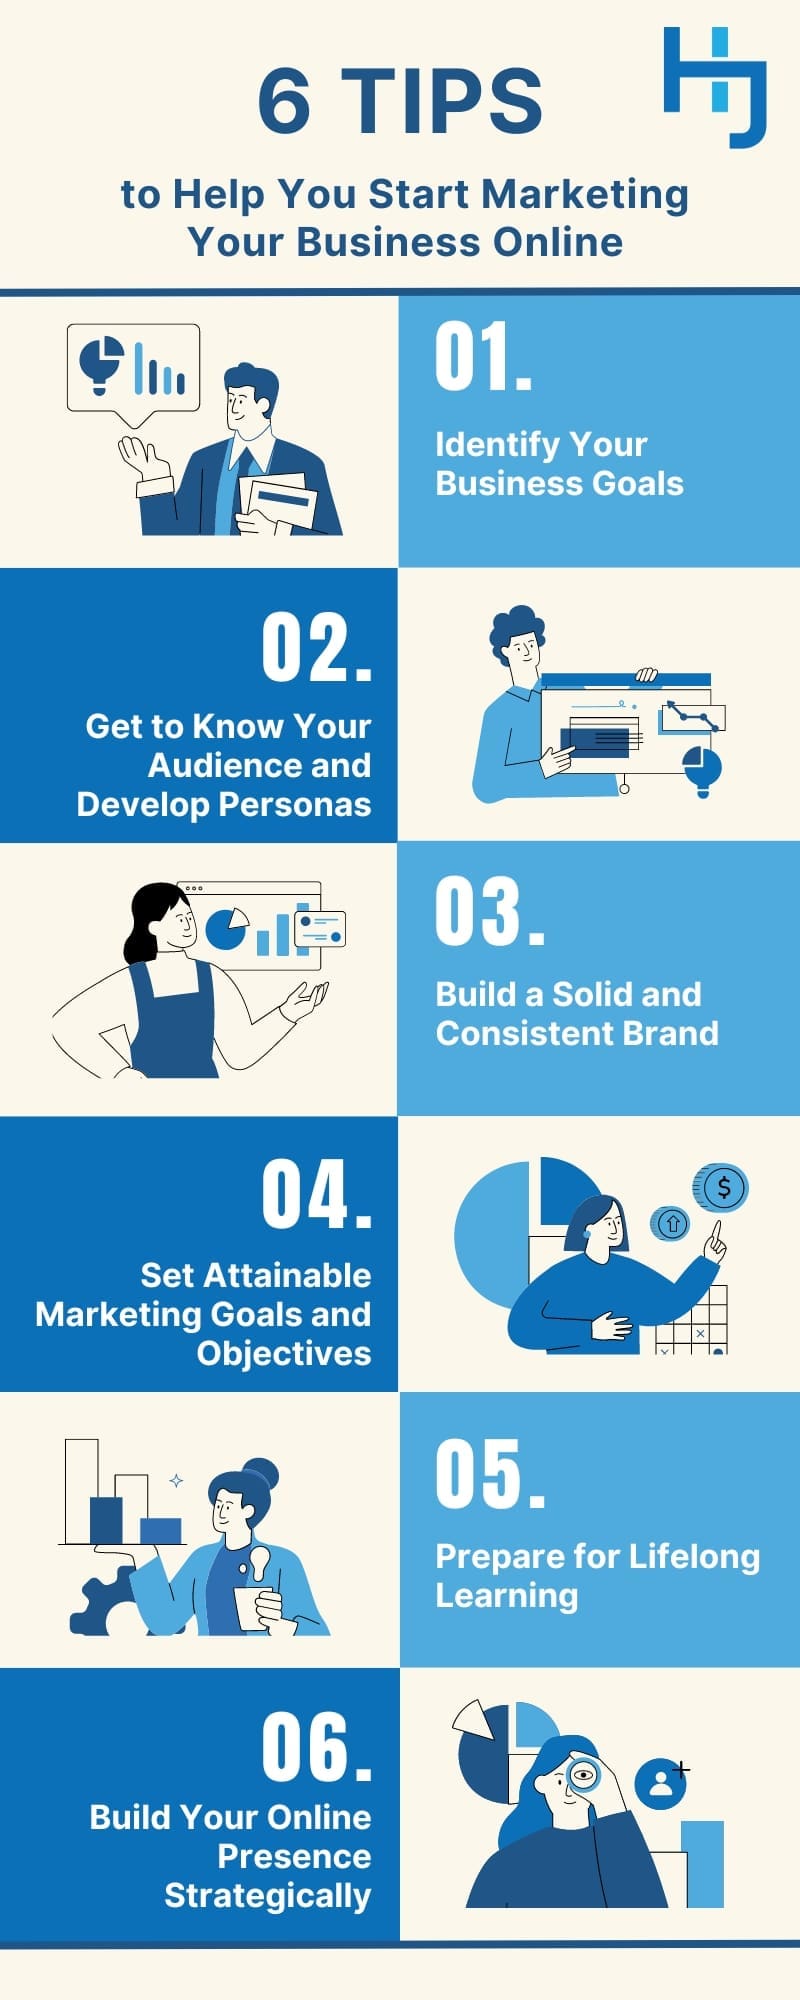 Digital Marketing Tips to Help You Start Marketing Your Business Online